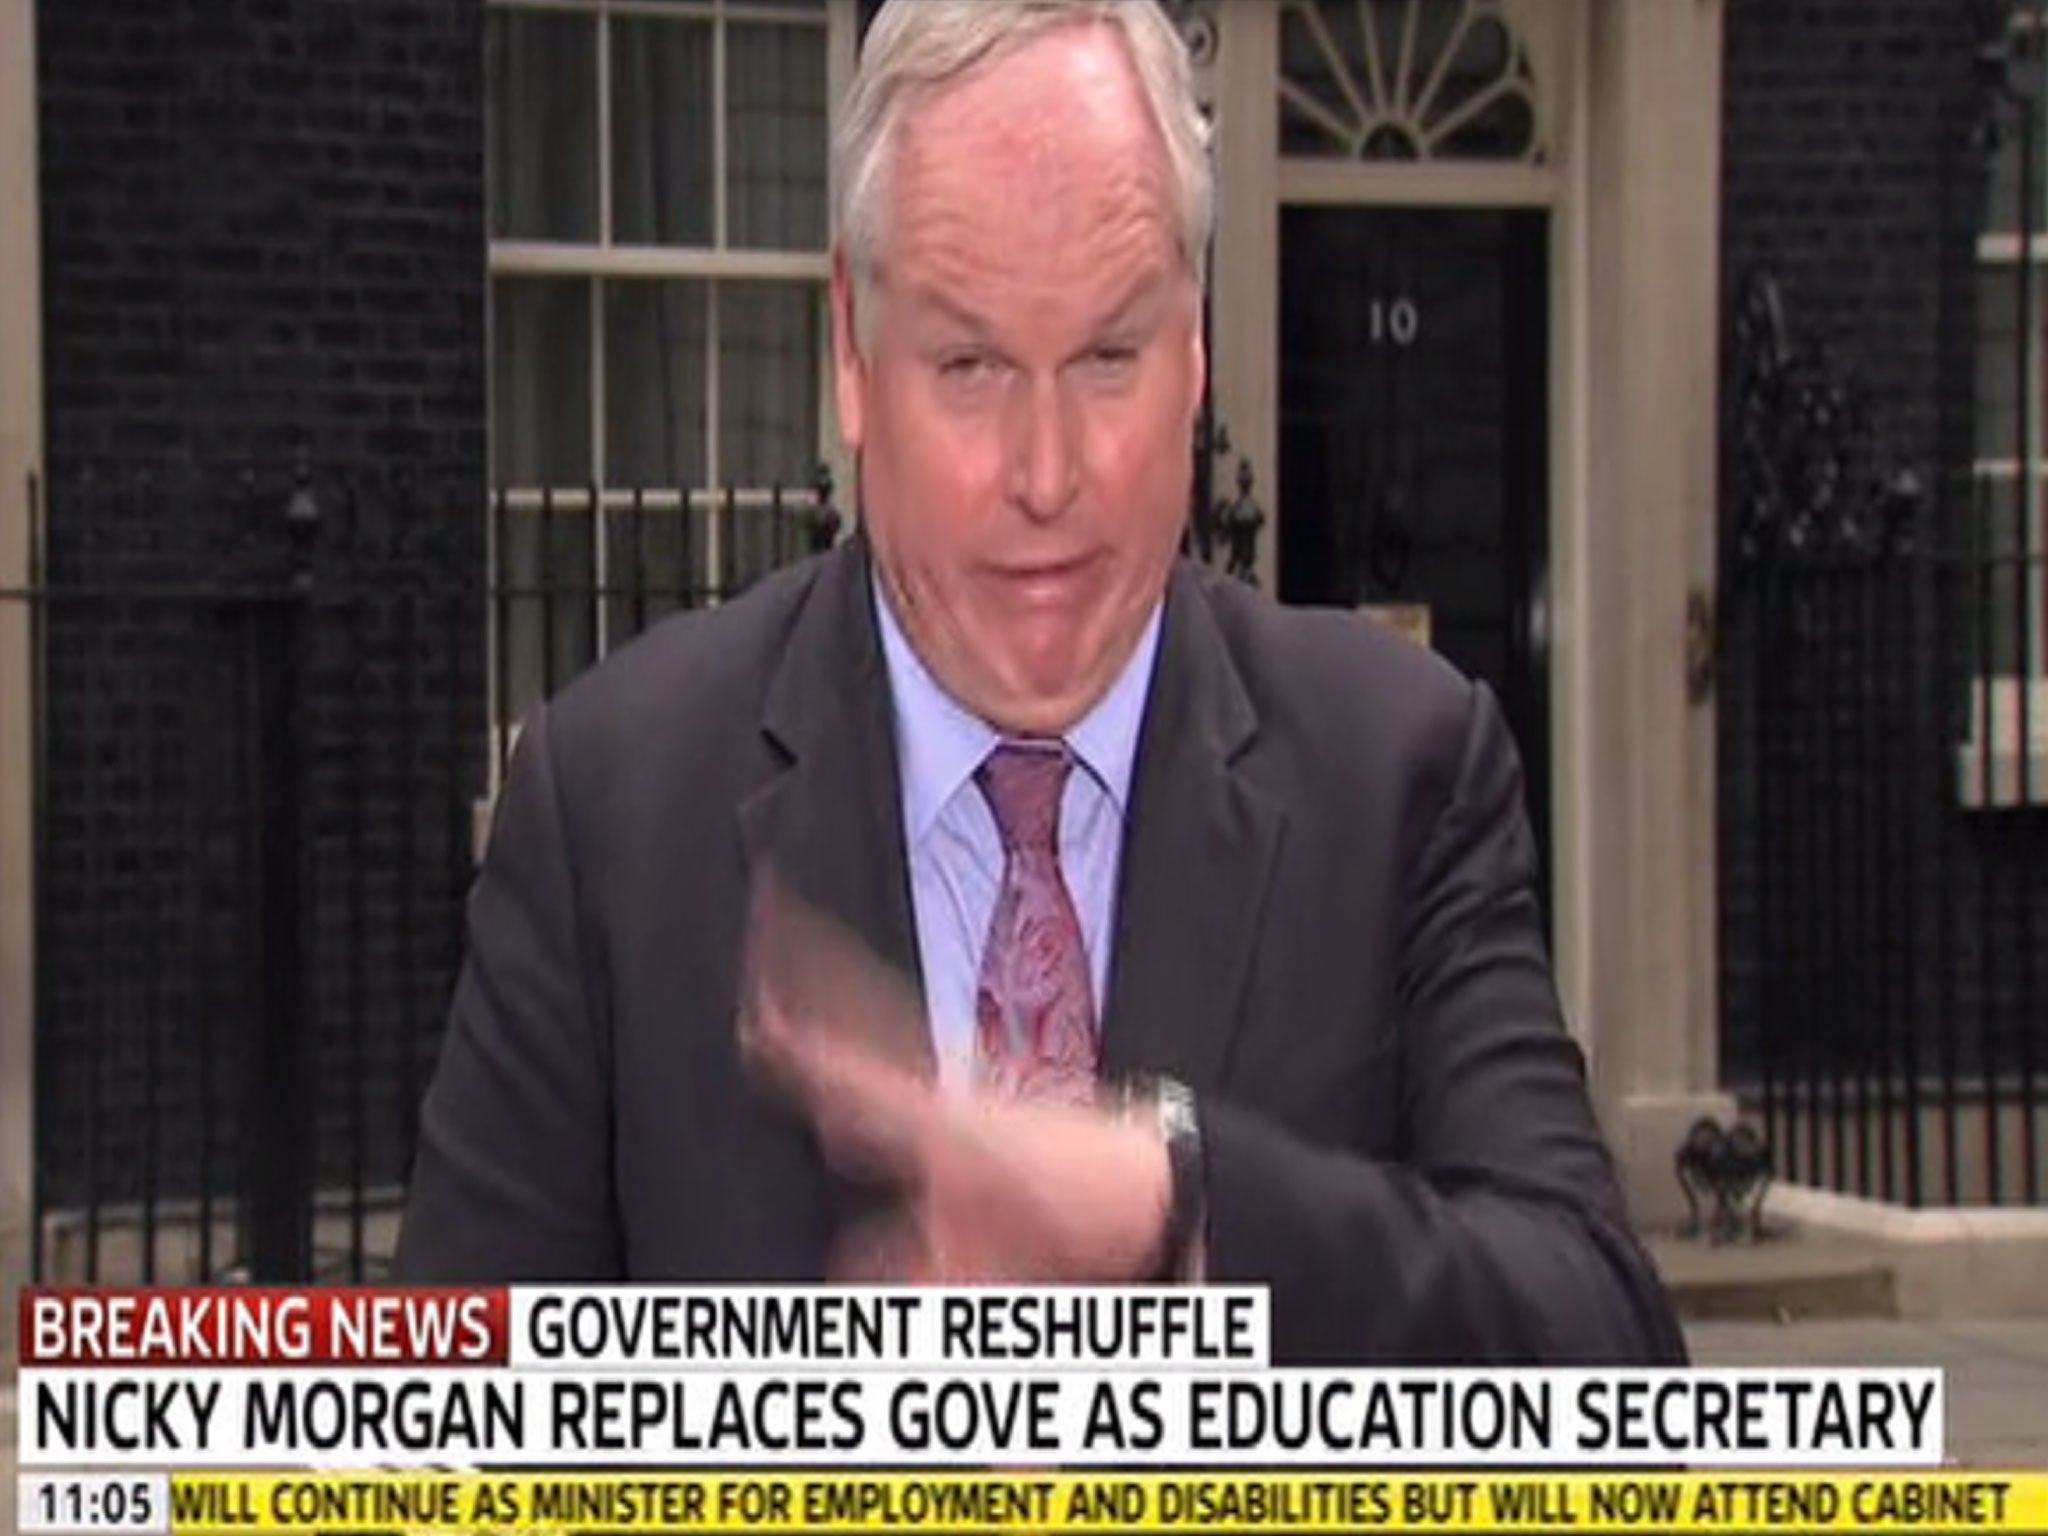 Adam Boulton swallowed a fly live on Sky News, but soldiered on after swallowing it.